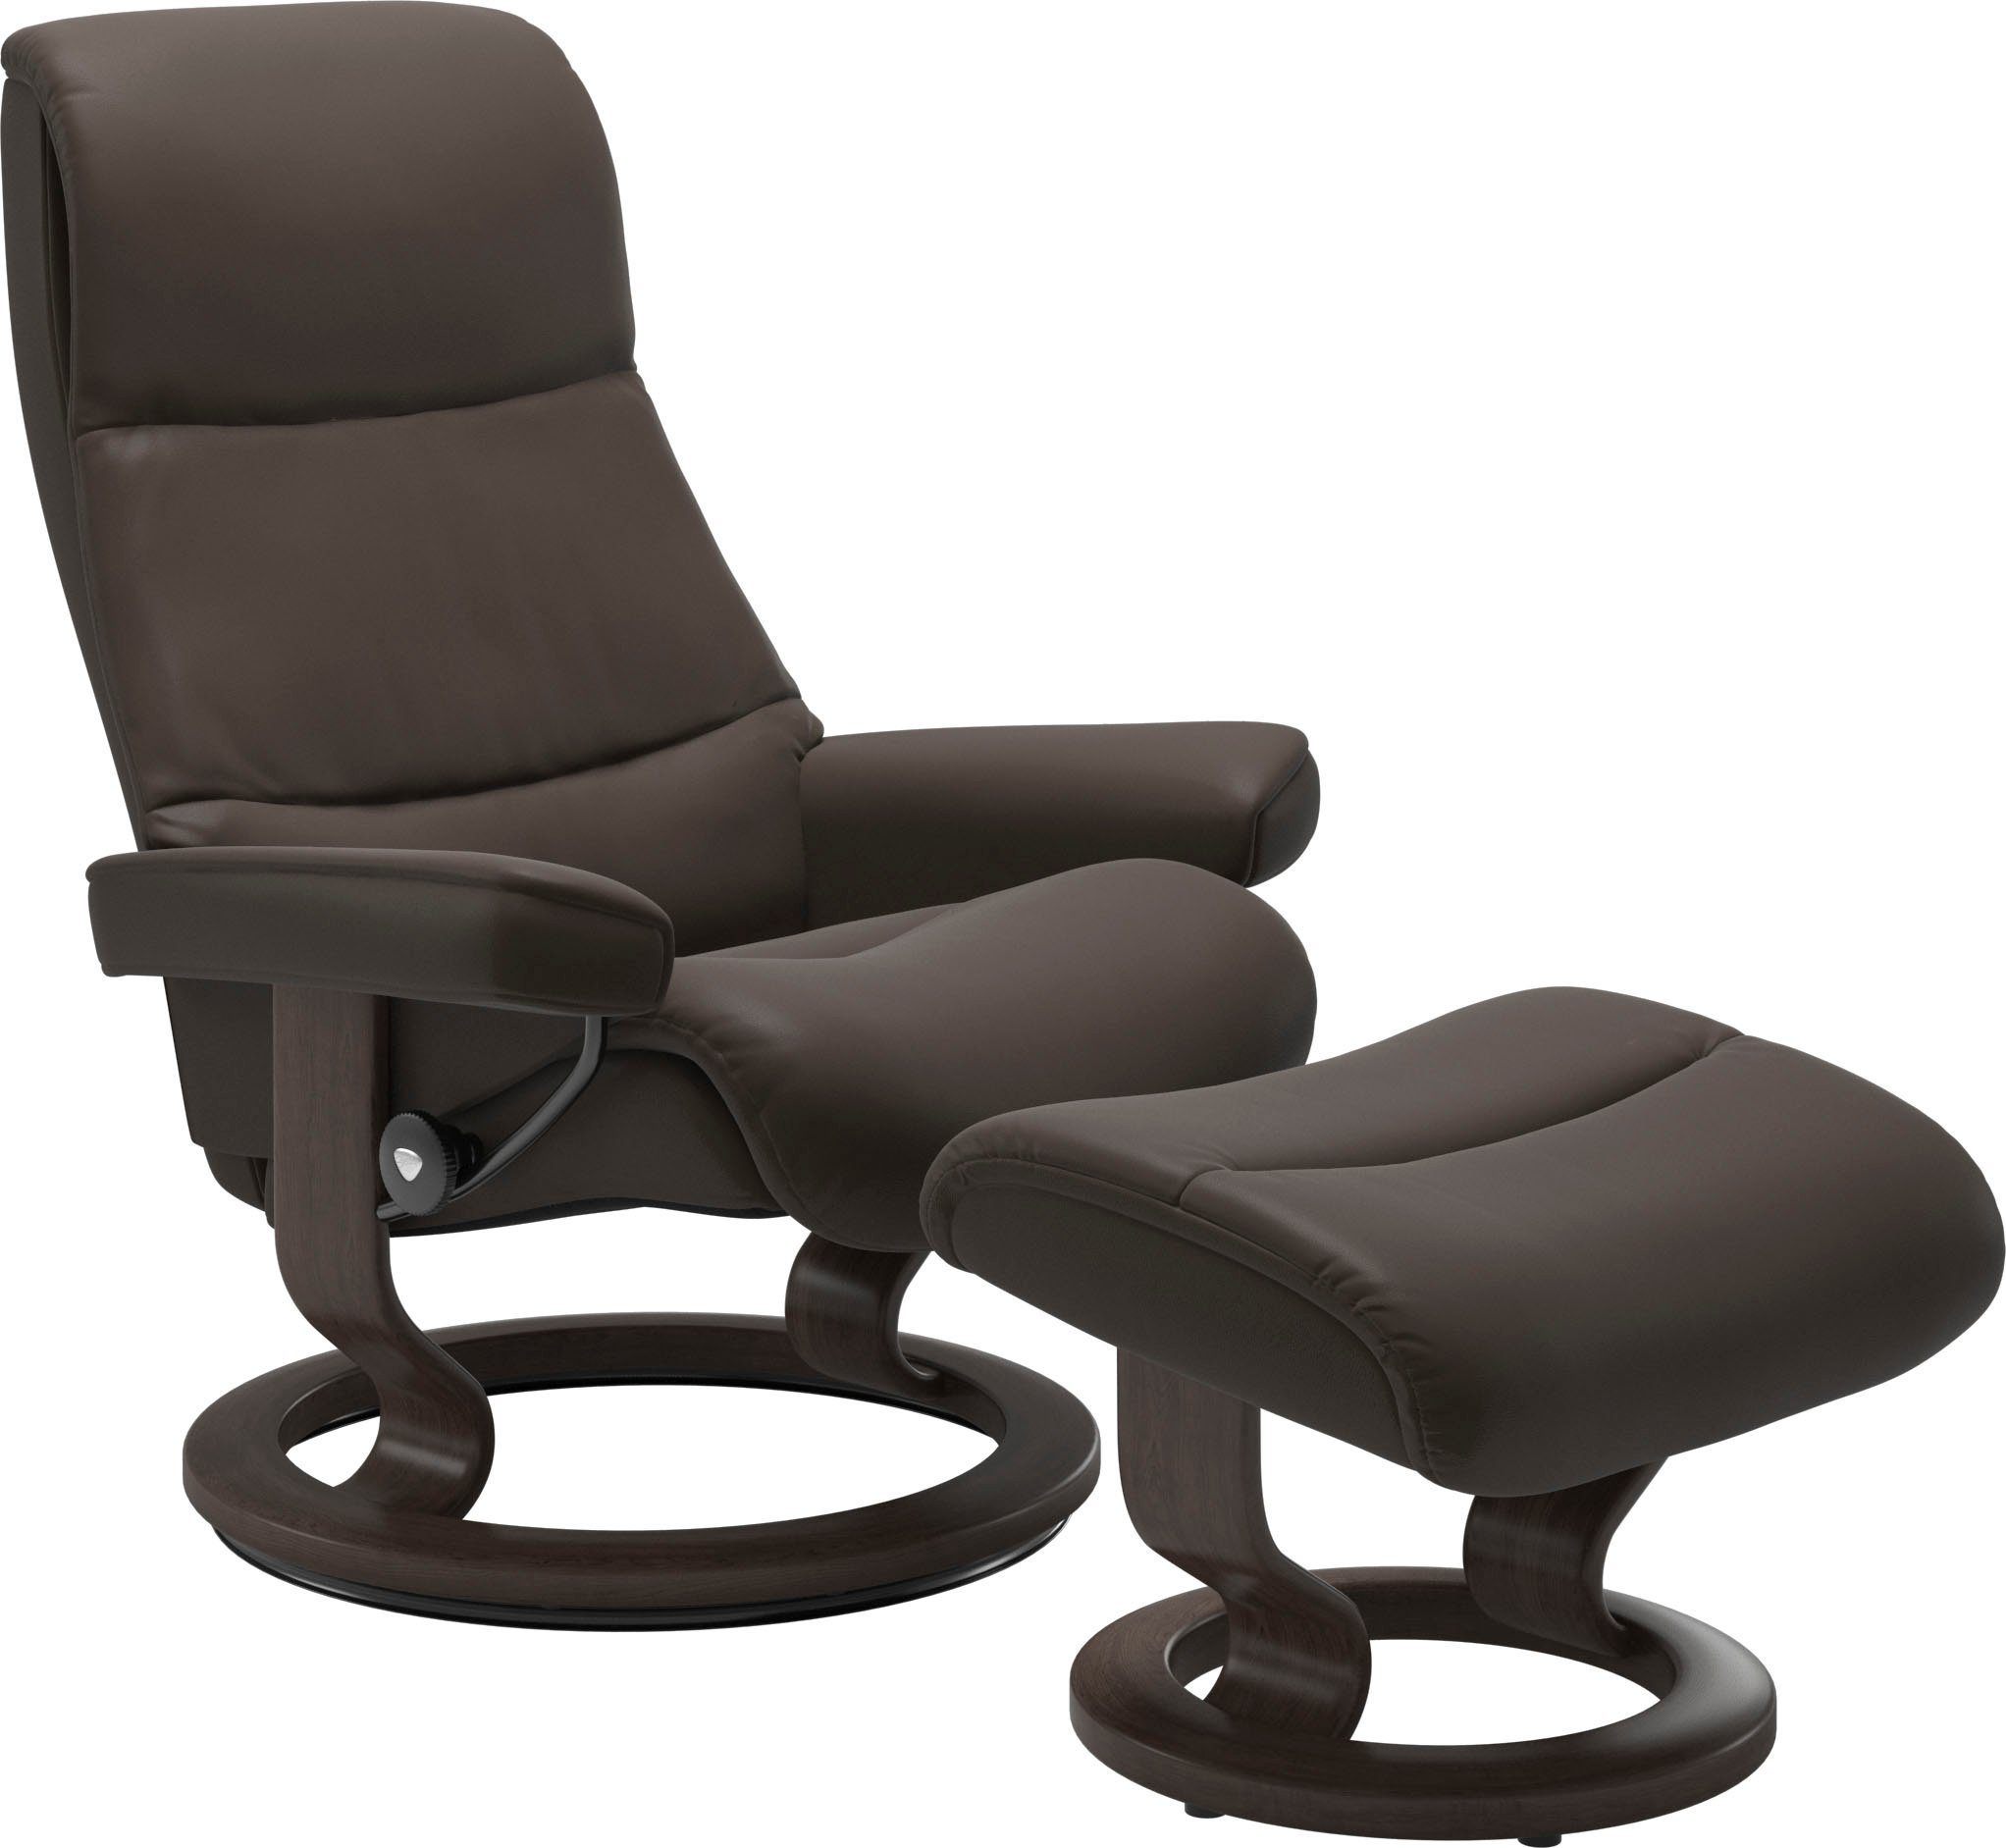 Wenge mit M,Gestell Classic Größe View, Stressless® Base, Relaxsessel